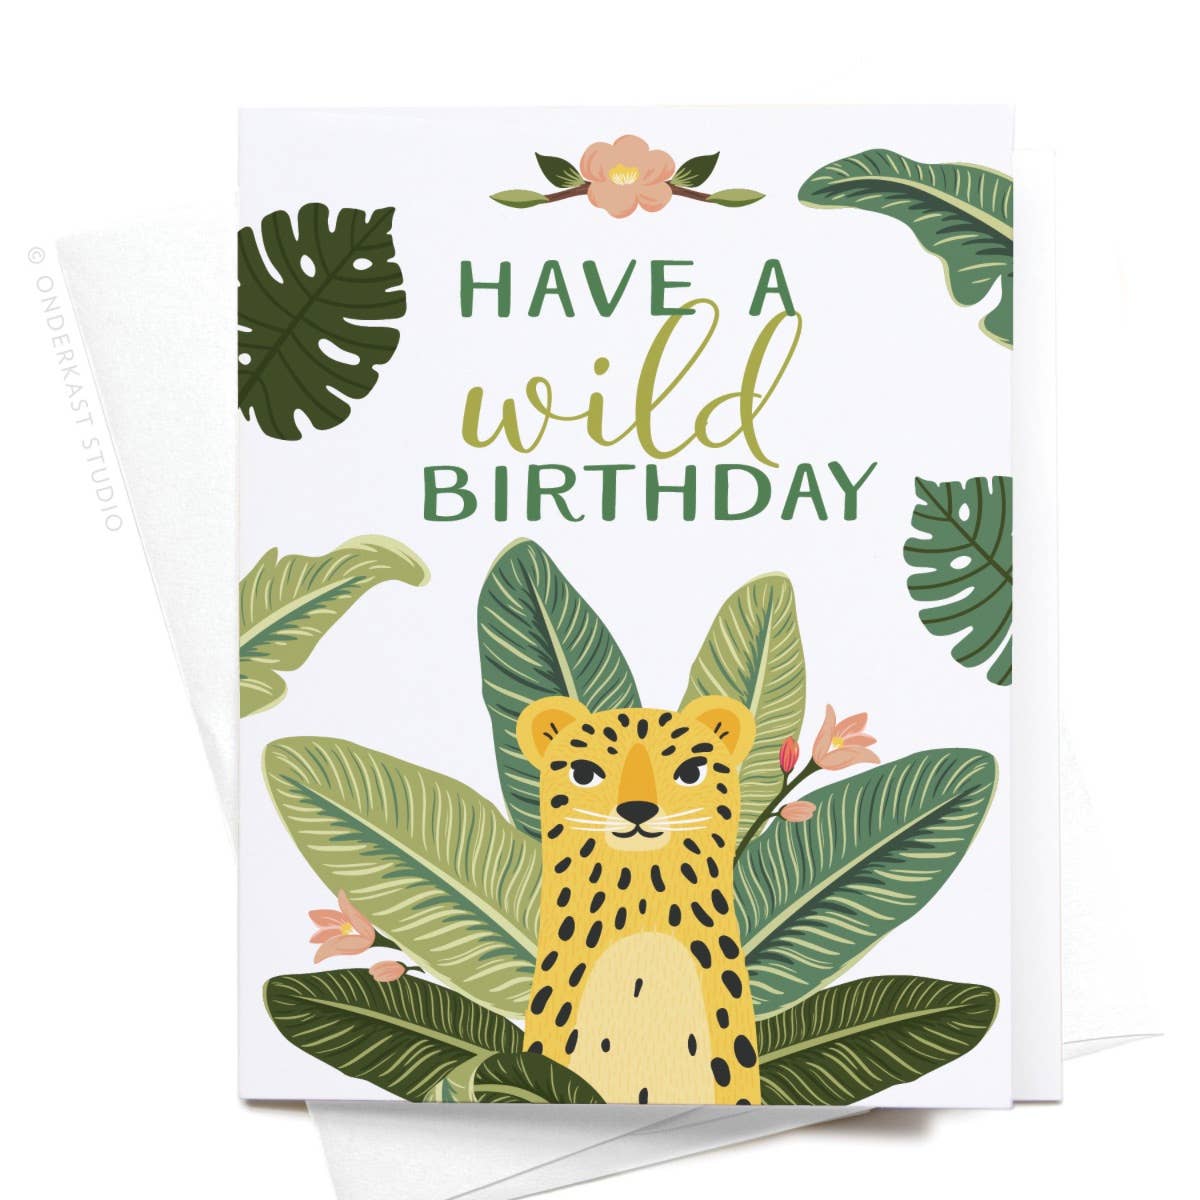 "Have a Wild Birthday" Greeting Card